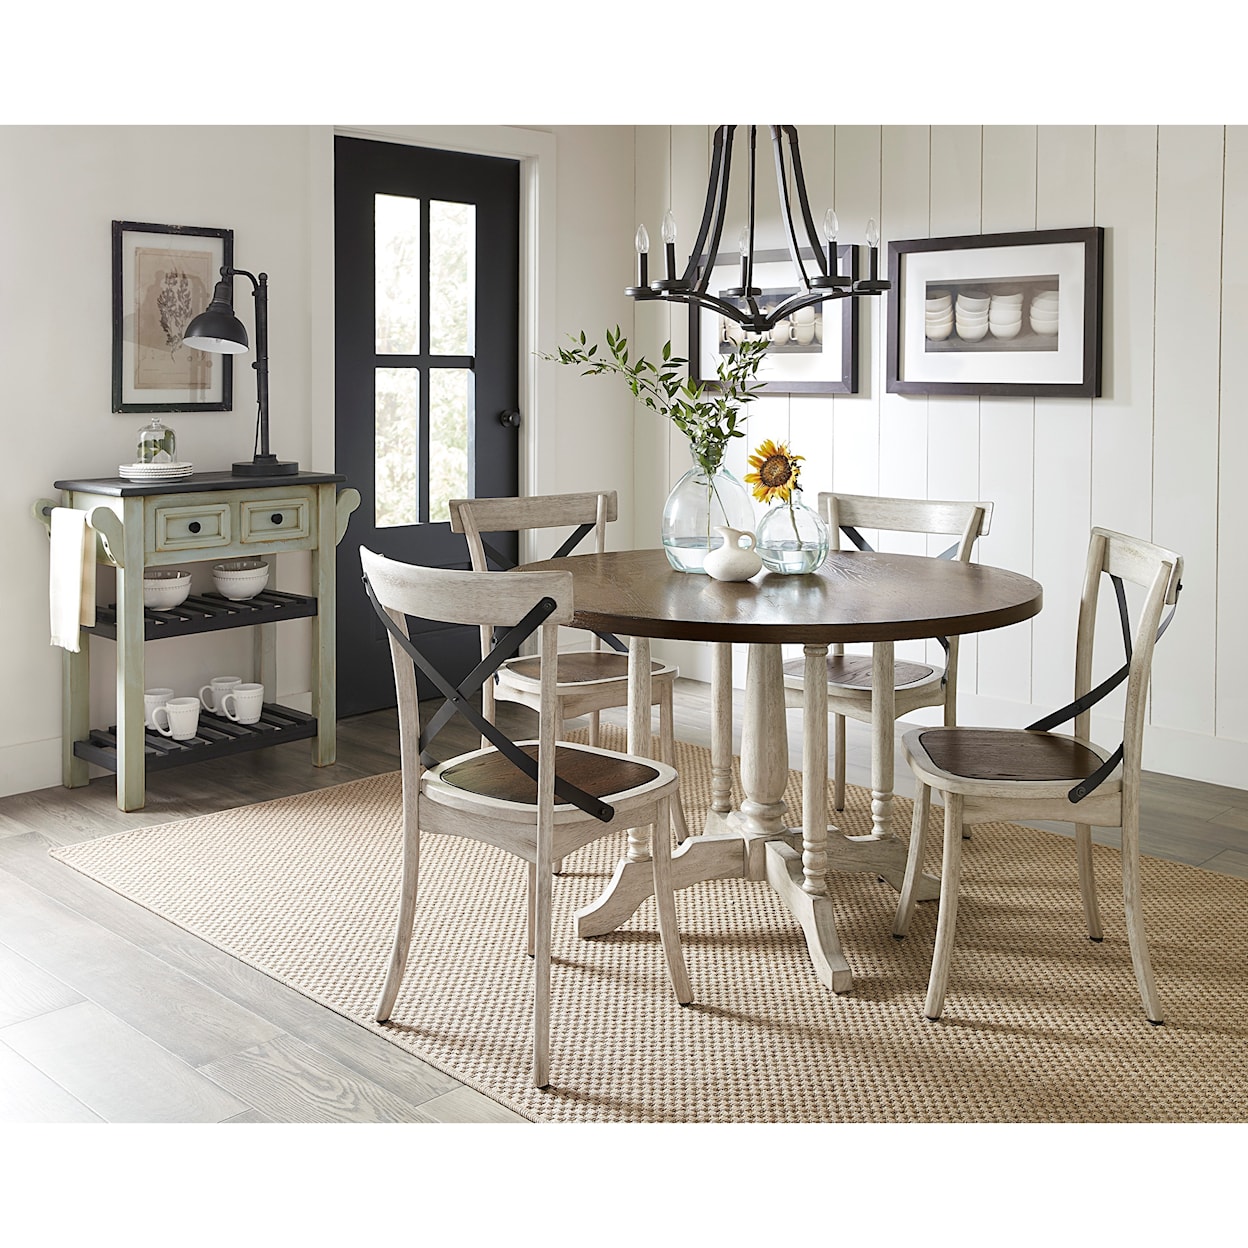 Carolina Chairs Winslet Round Dining Table